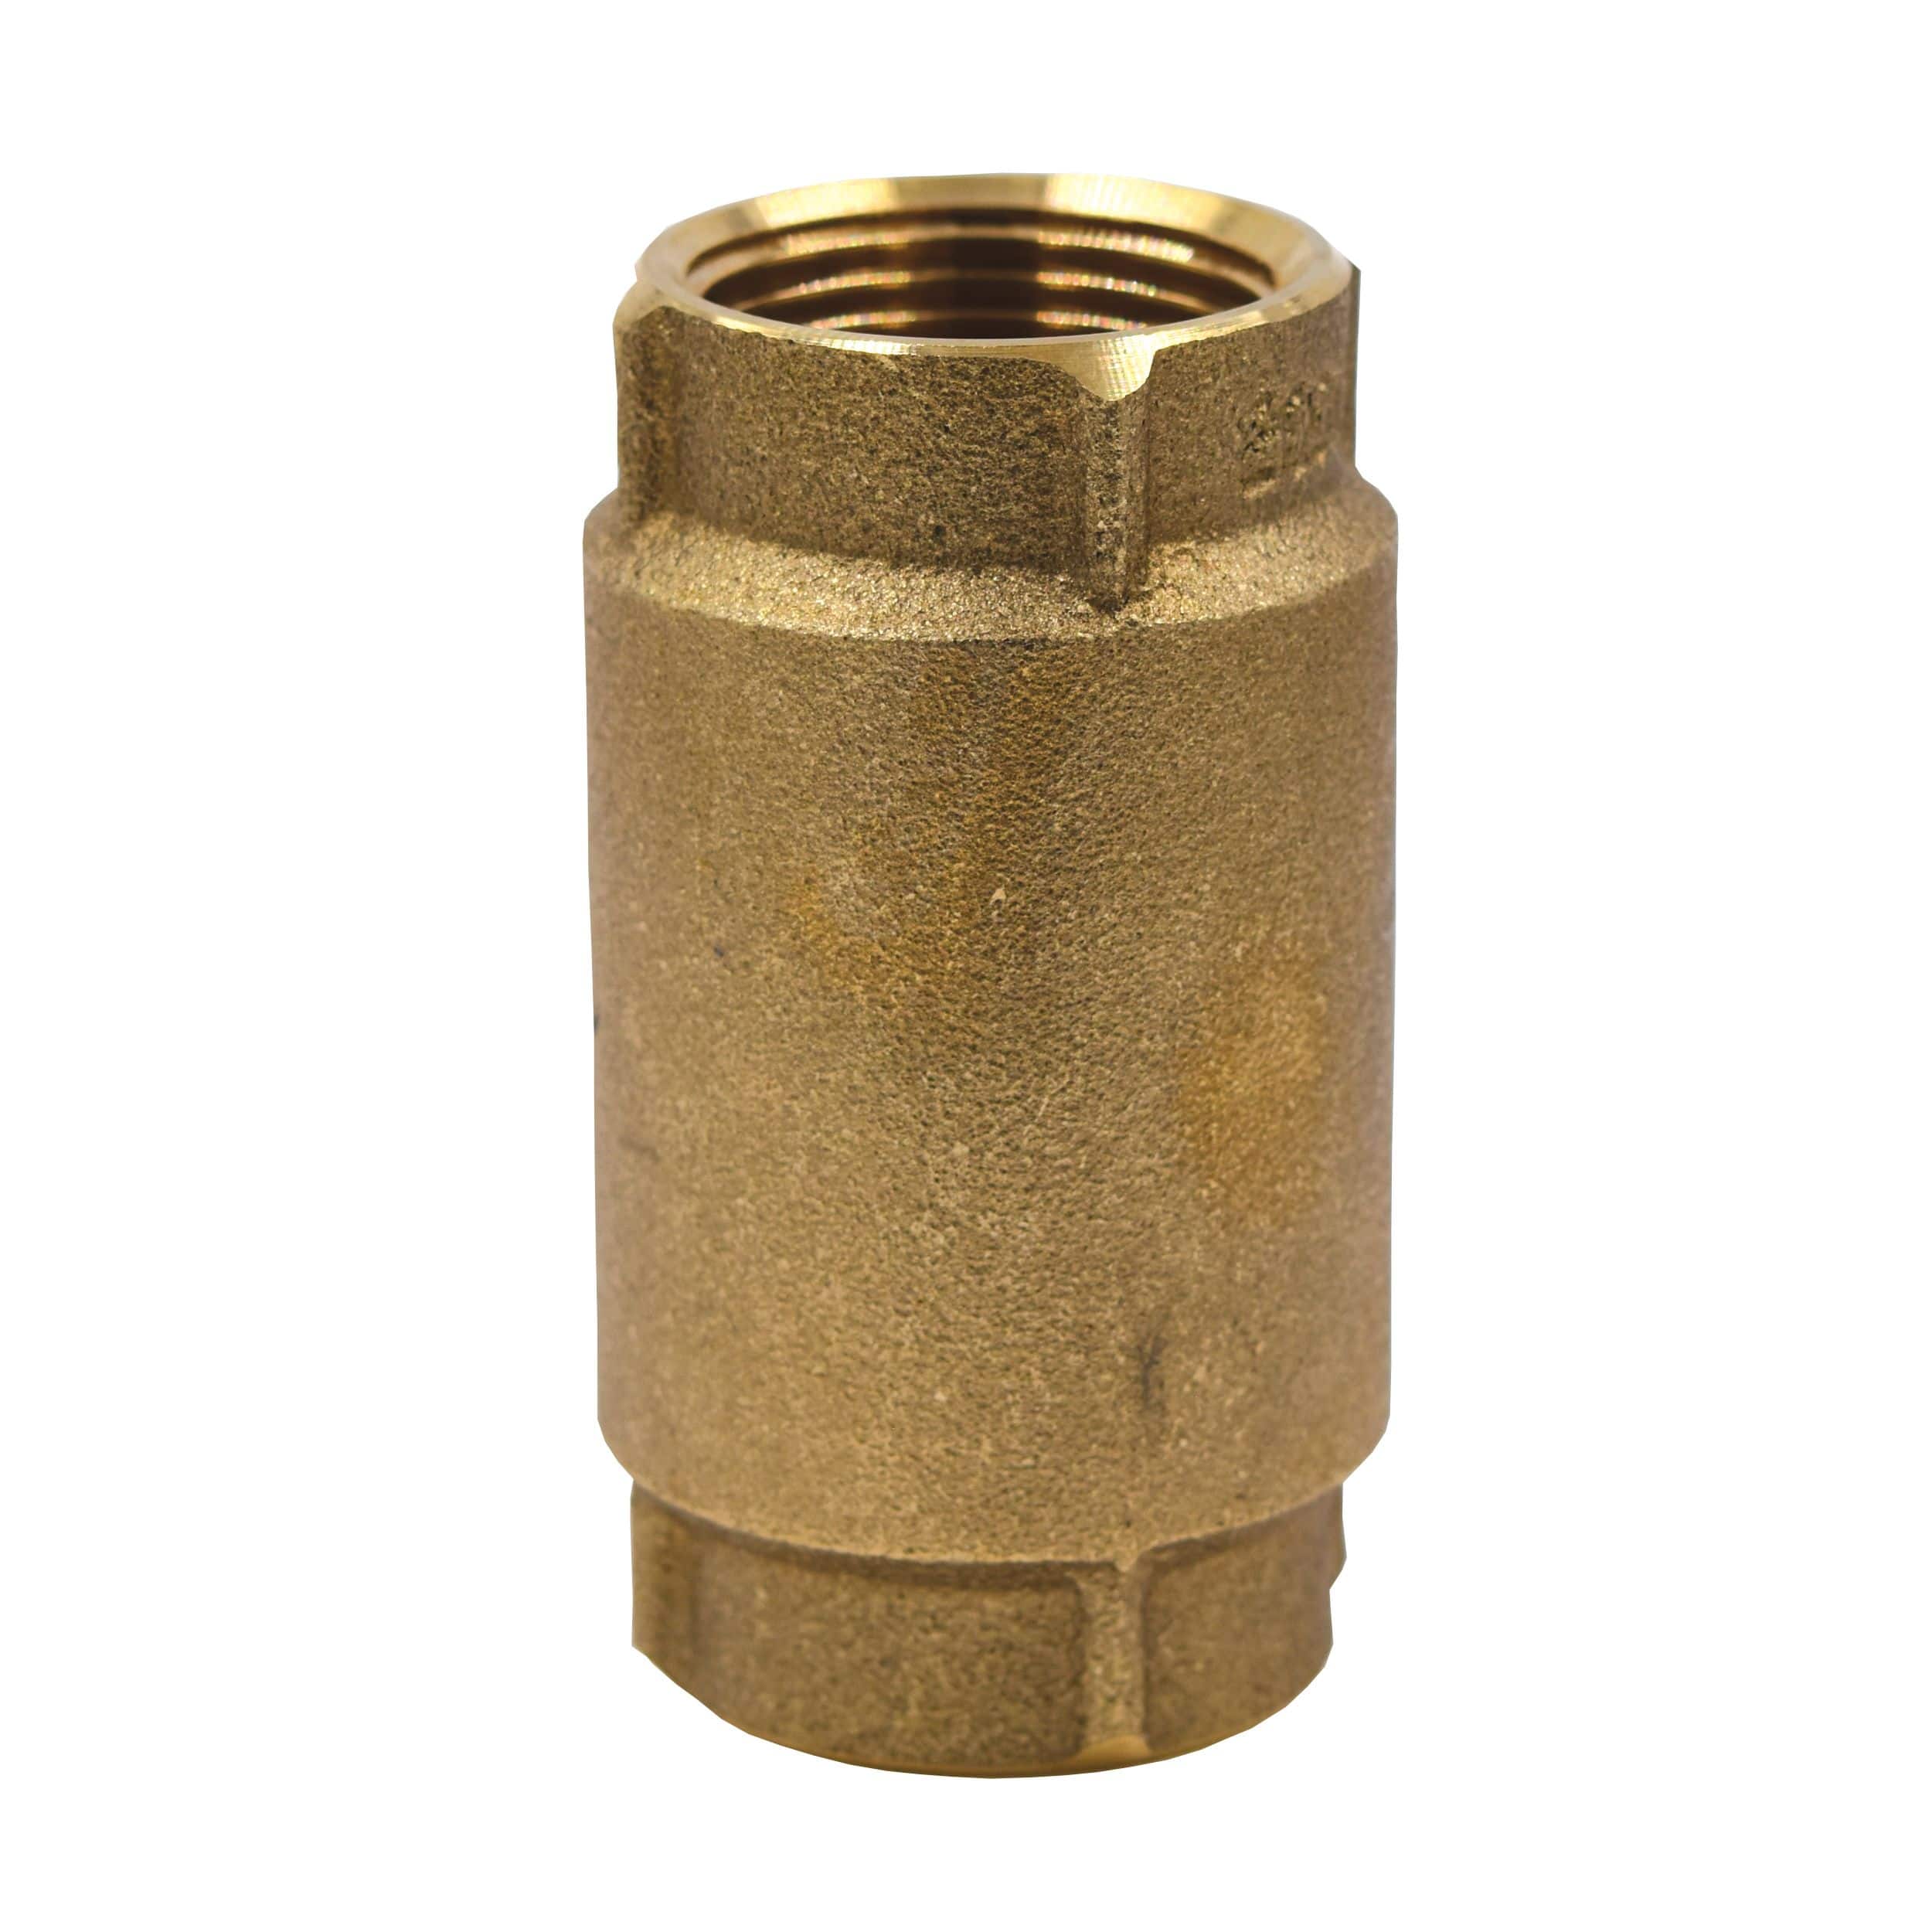 H2O PRO 1 Inch Brass Check Valve for Submersible Well, Centrifugal, and Jet  Pumps - Keeps Water System Primed, Spring Controlled, 1